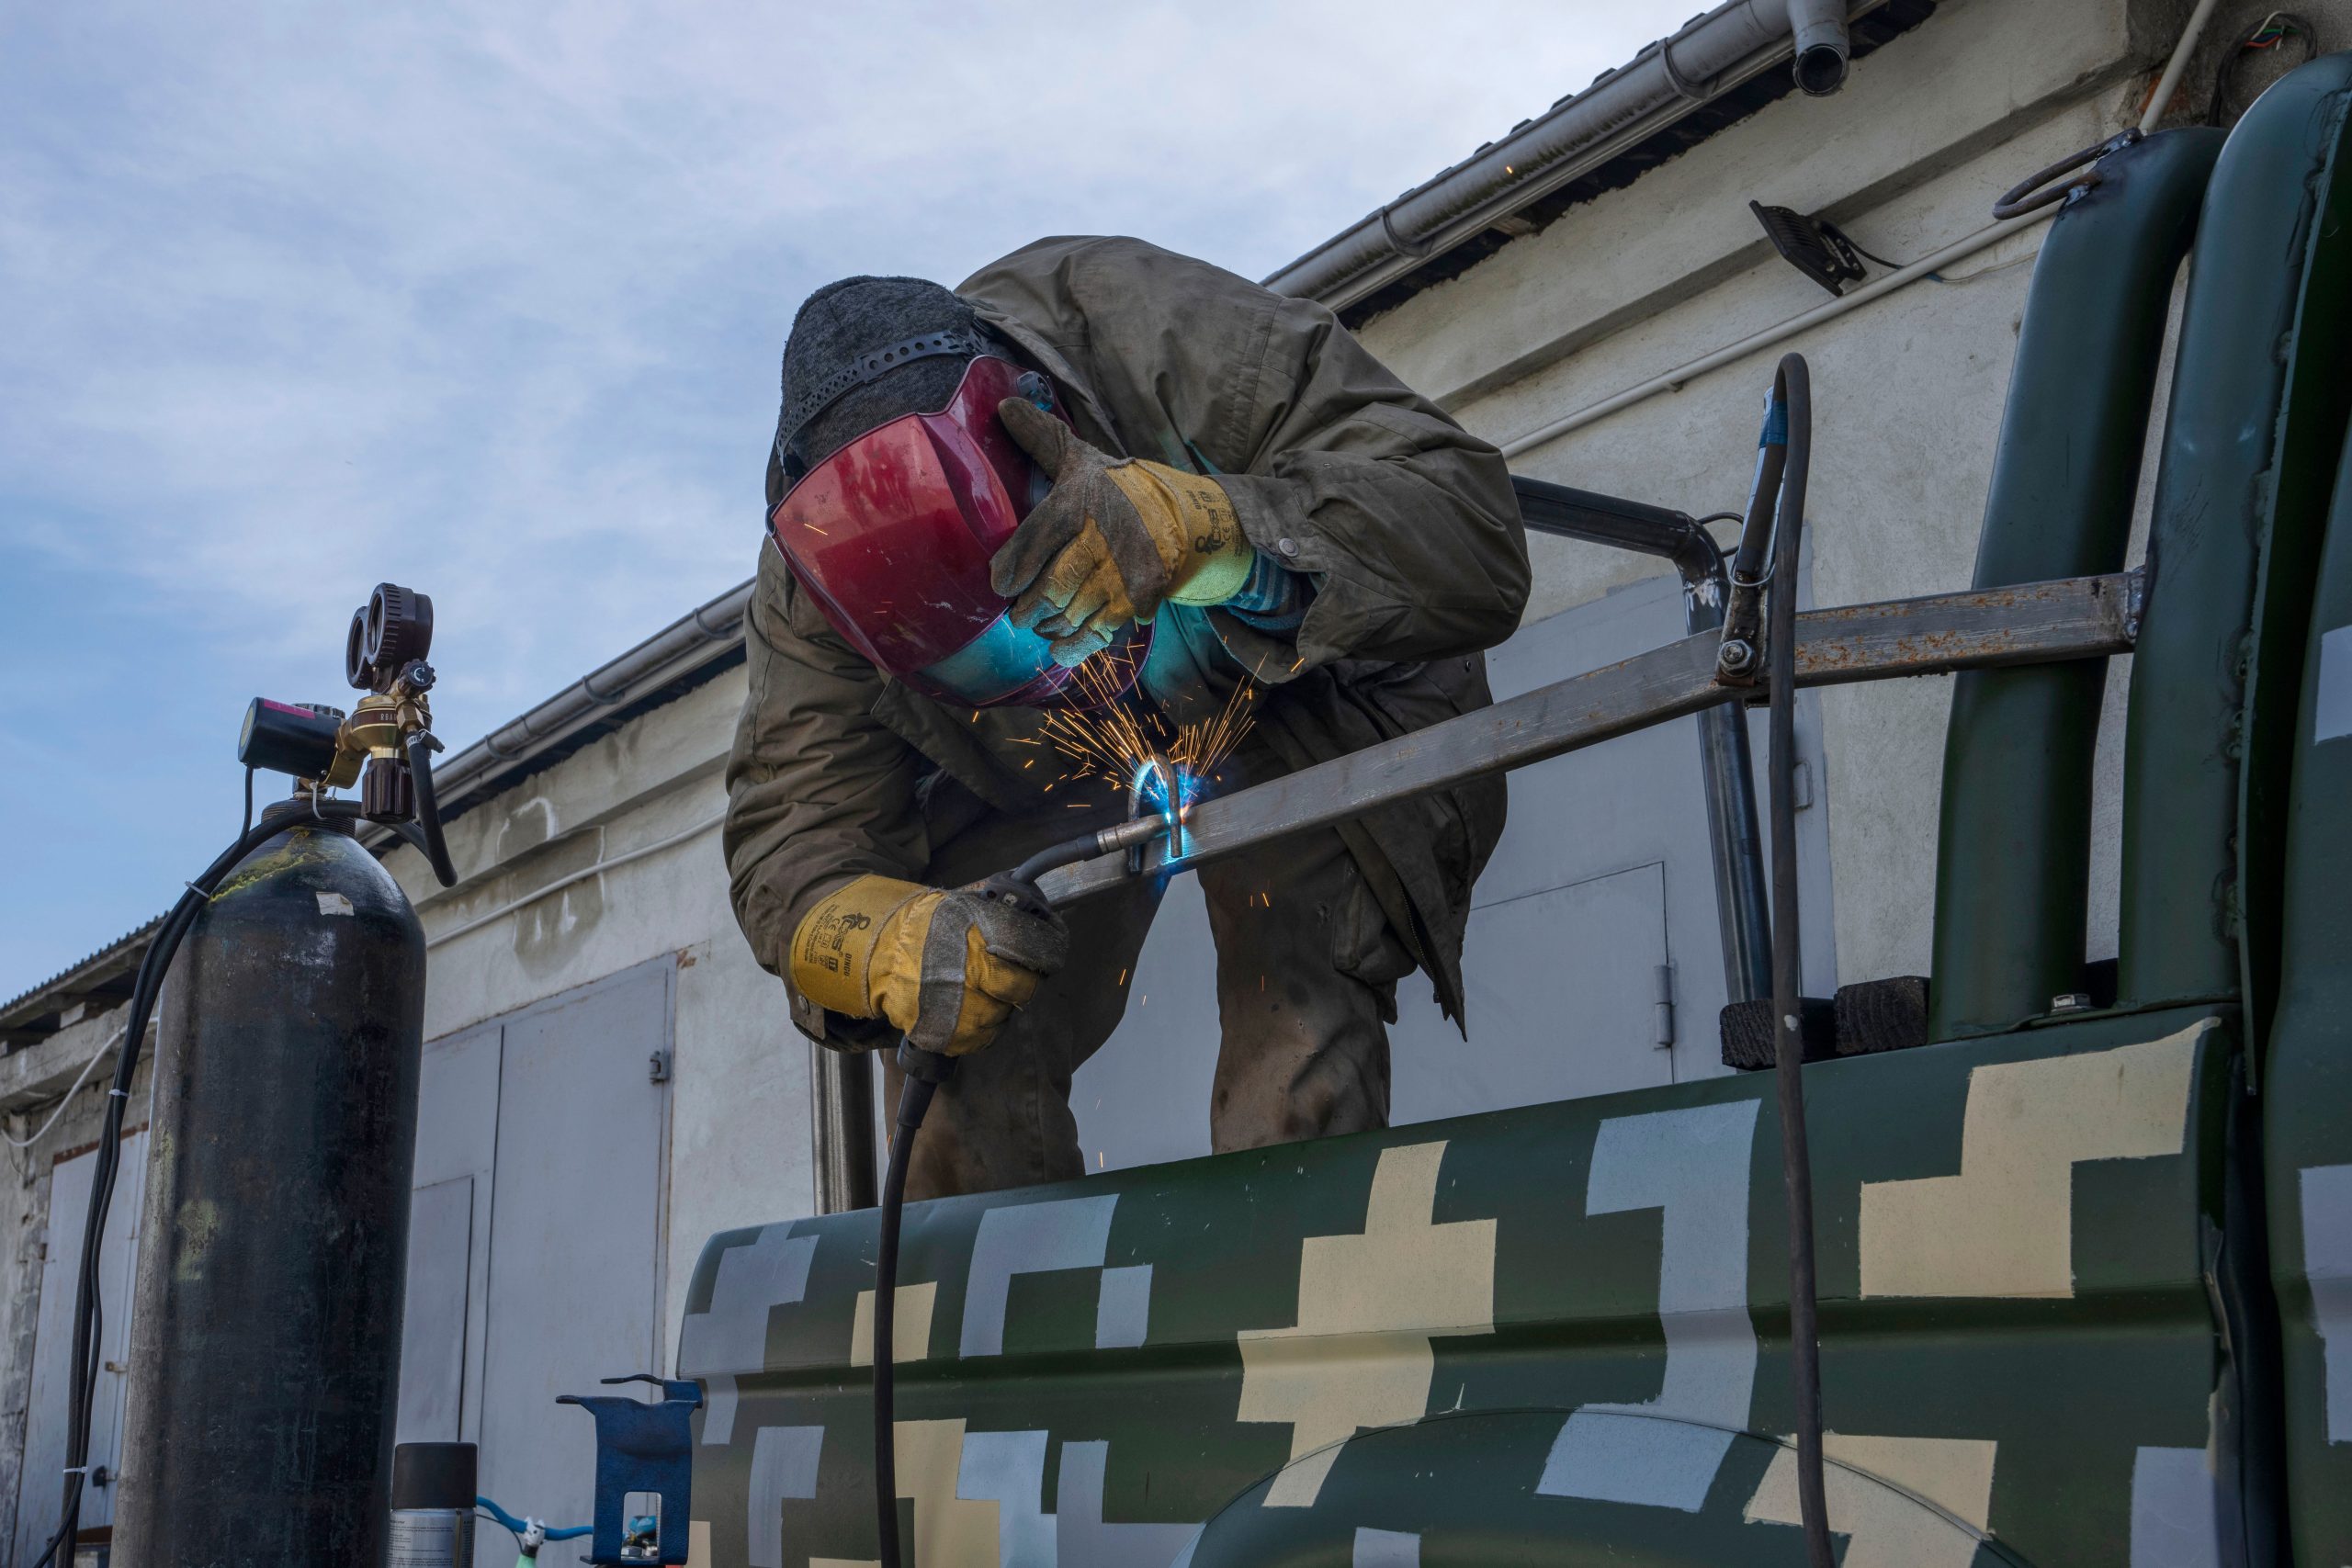 Our victory depends on us: Ukrainian welders turn donated vehicles into army transport